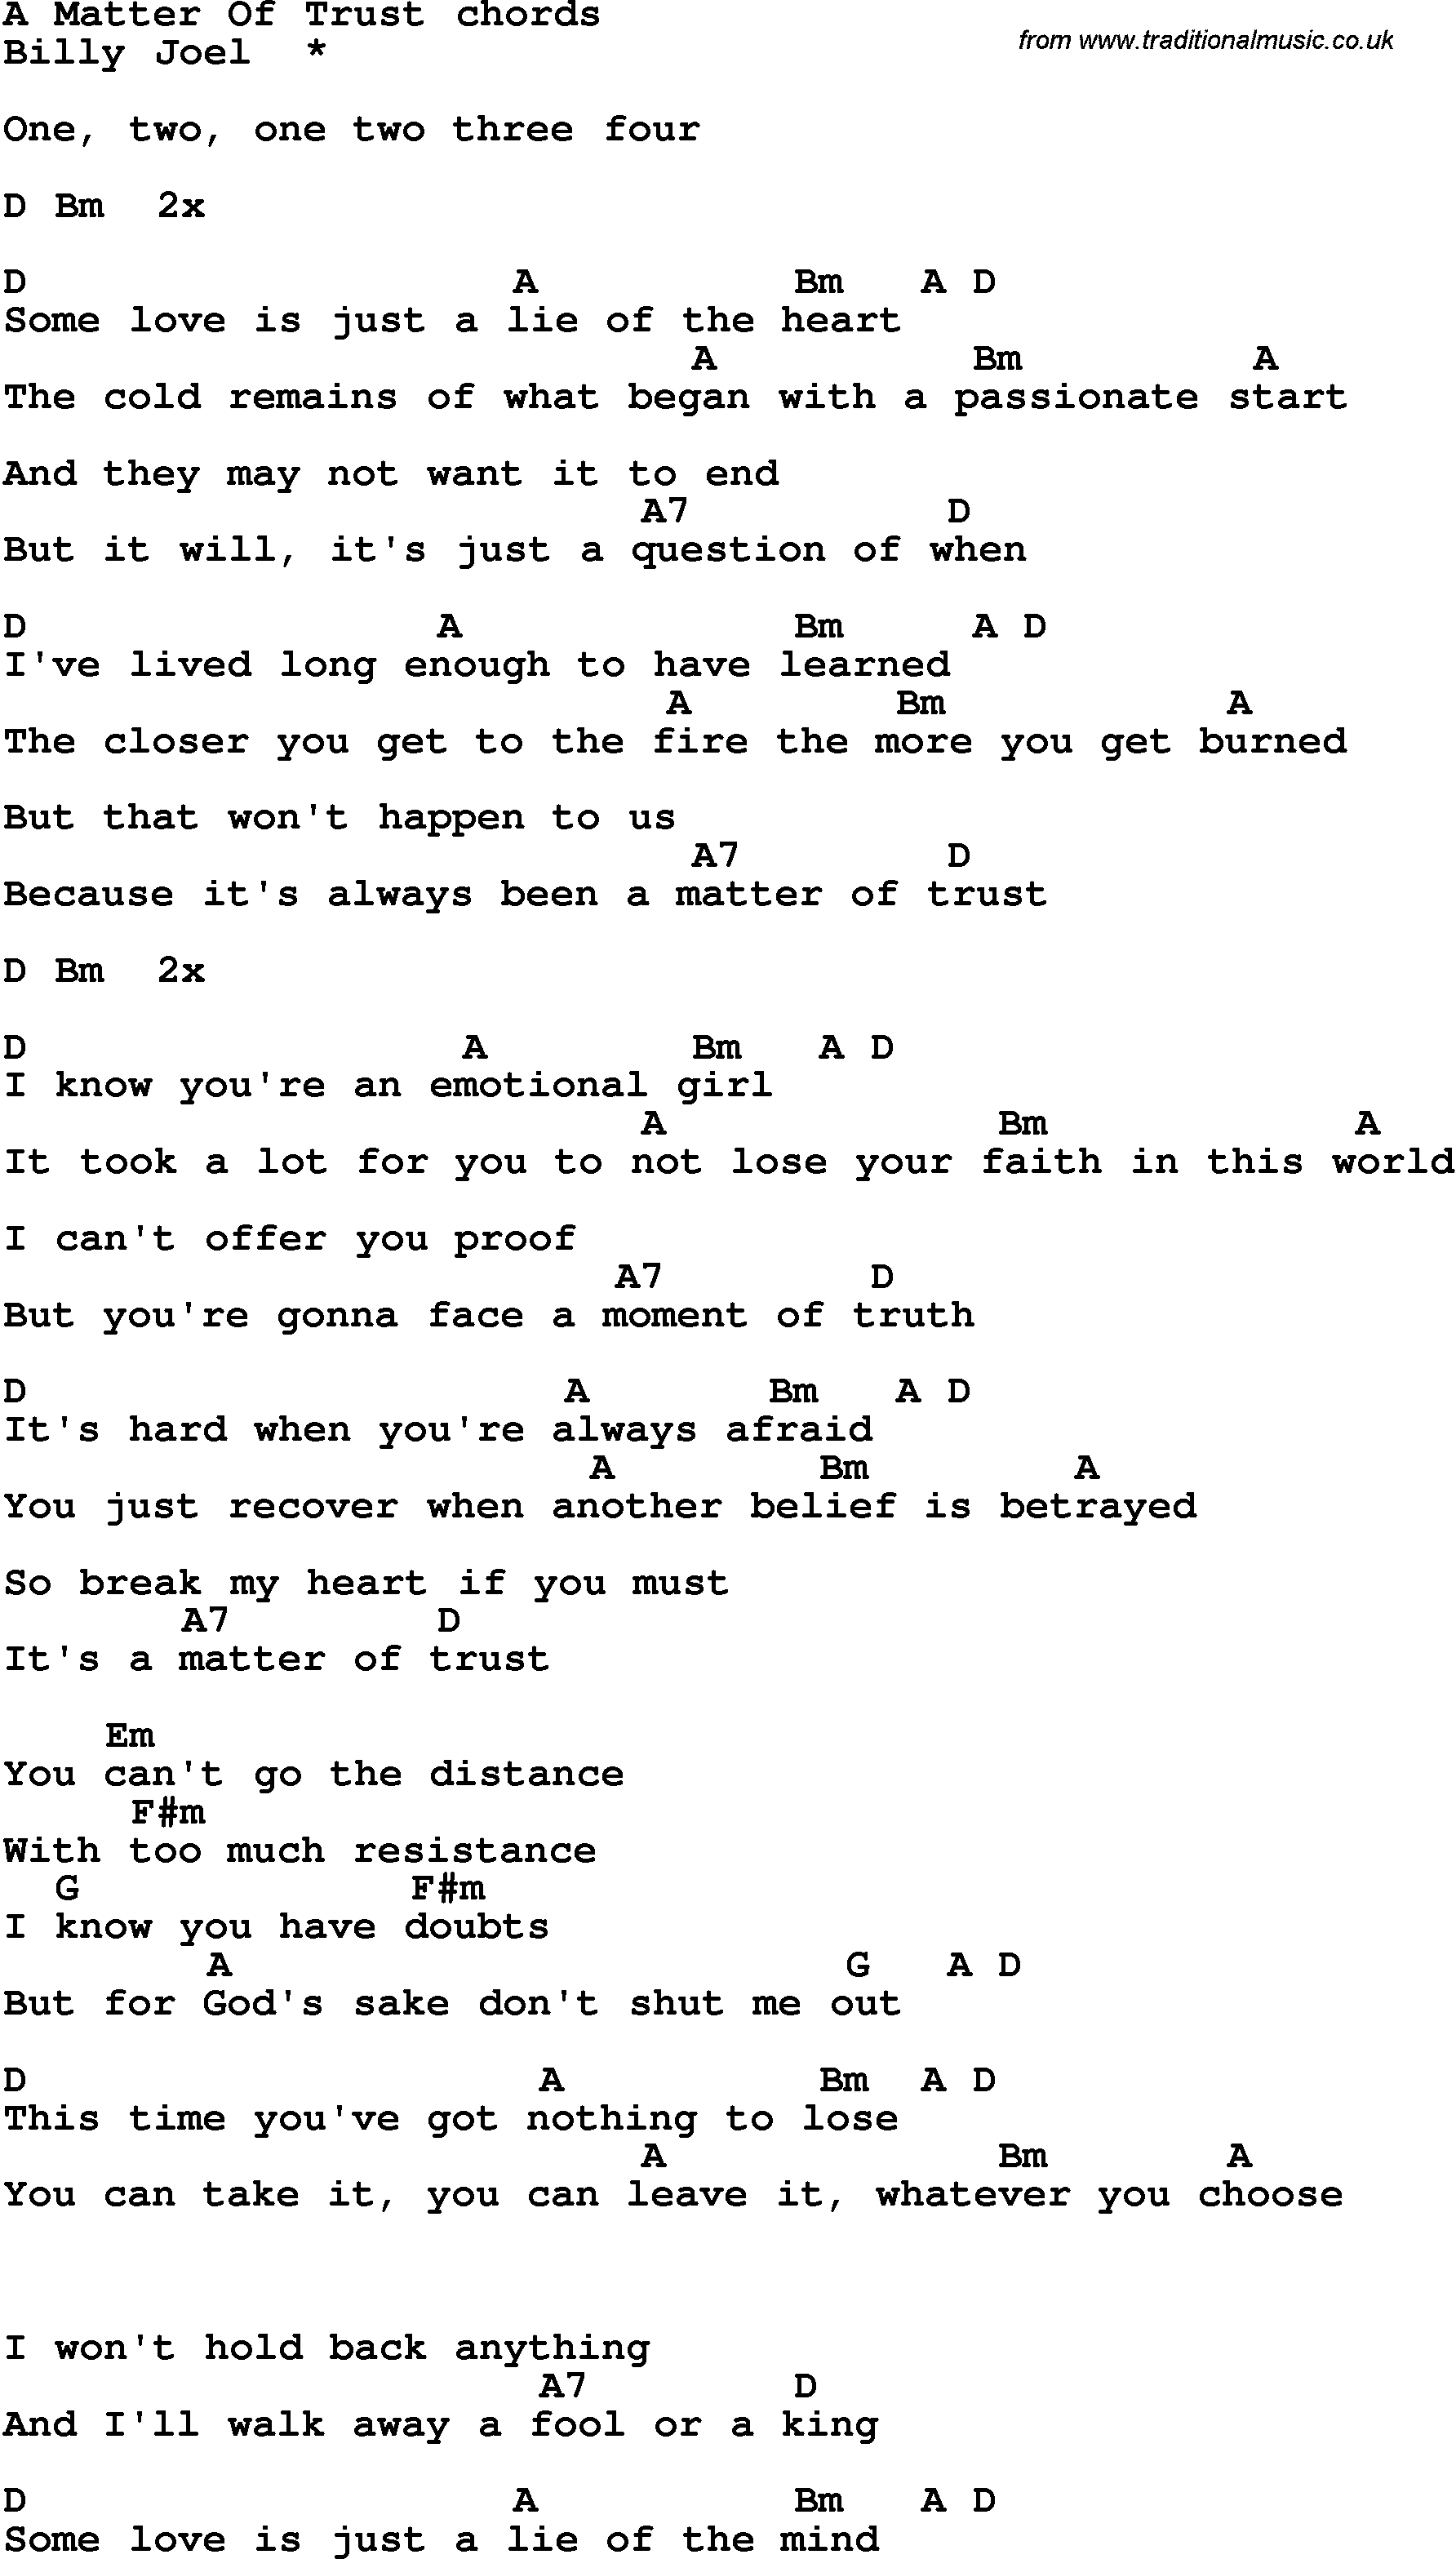 Song Lyrics with guitar chords for A Matter Of Trust